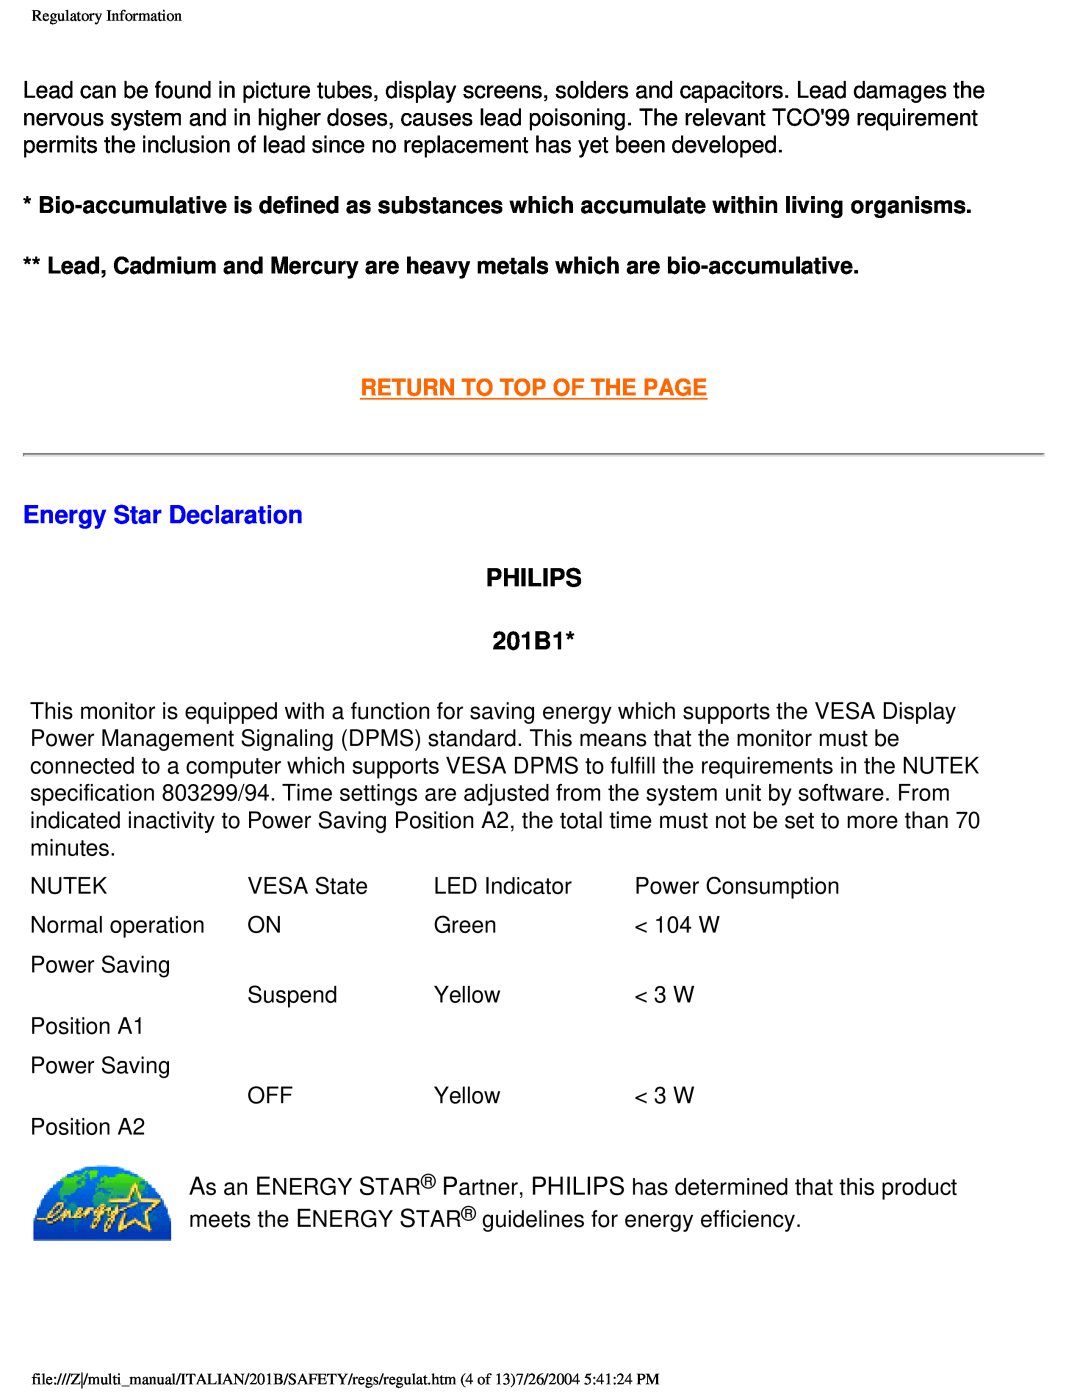 Philips user manual Energy Star Declaration, PHILIPS 201B1, Return To Top Of The Page 